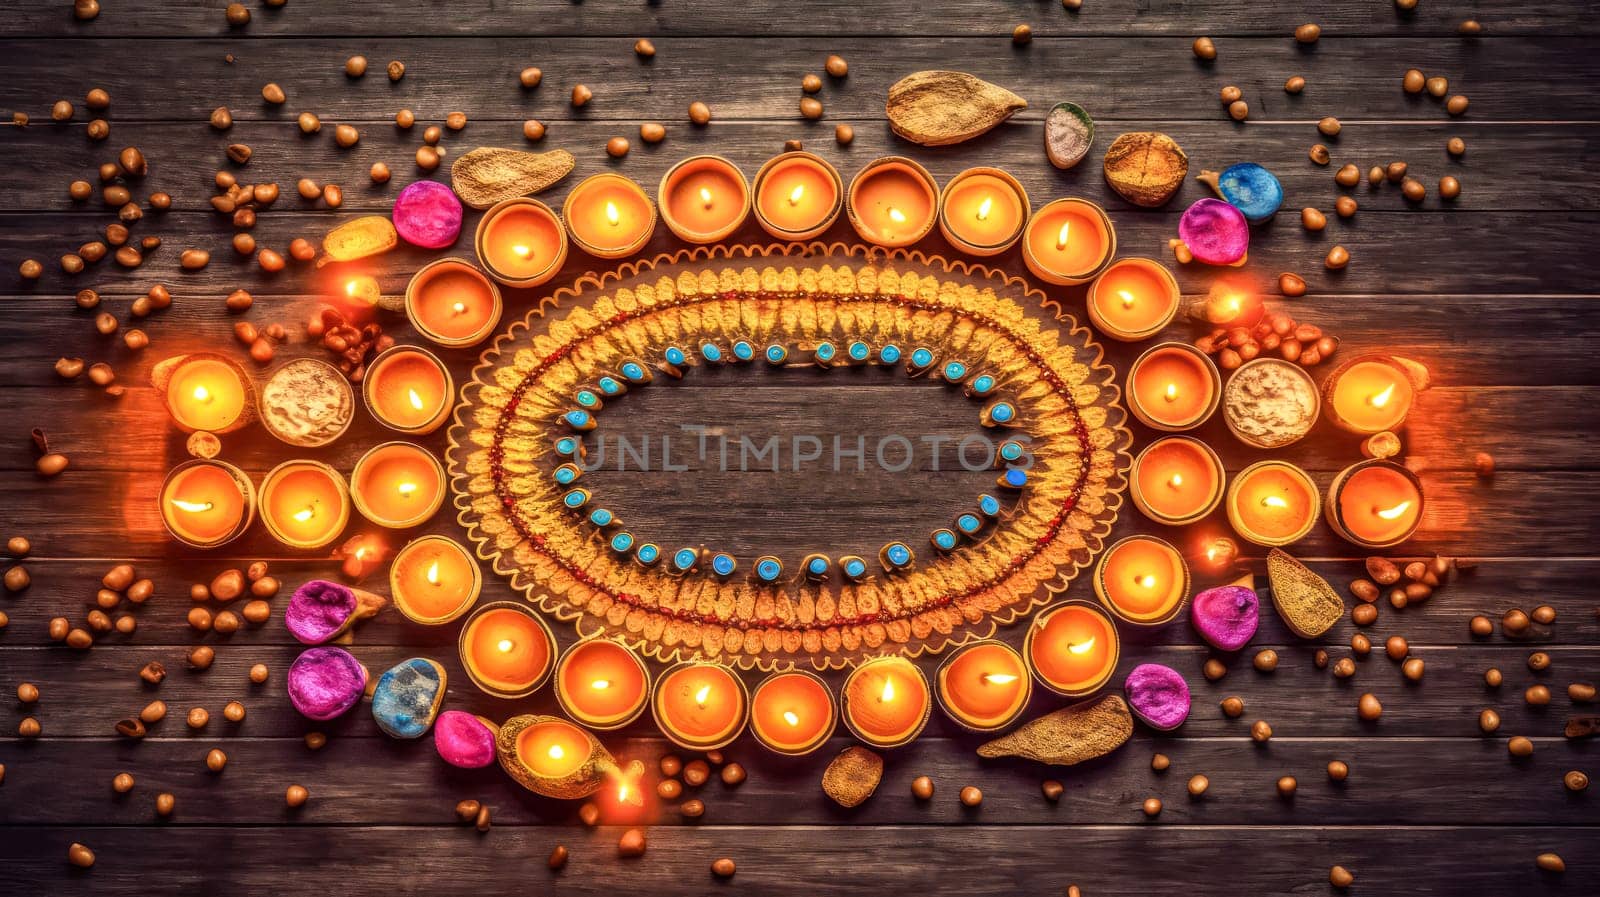 A colorful candle arrangement with many candles lit. The candles are arranged in a circle and are of different colors. Scene is warm and inviting, as the candles create a cozy atmosphere